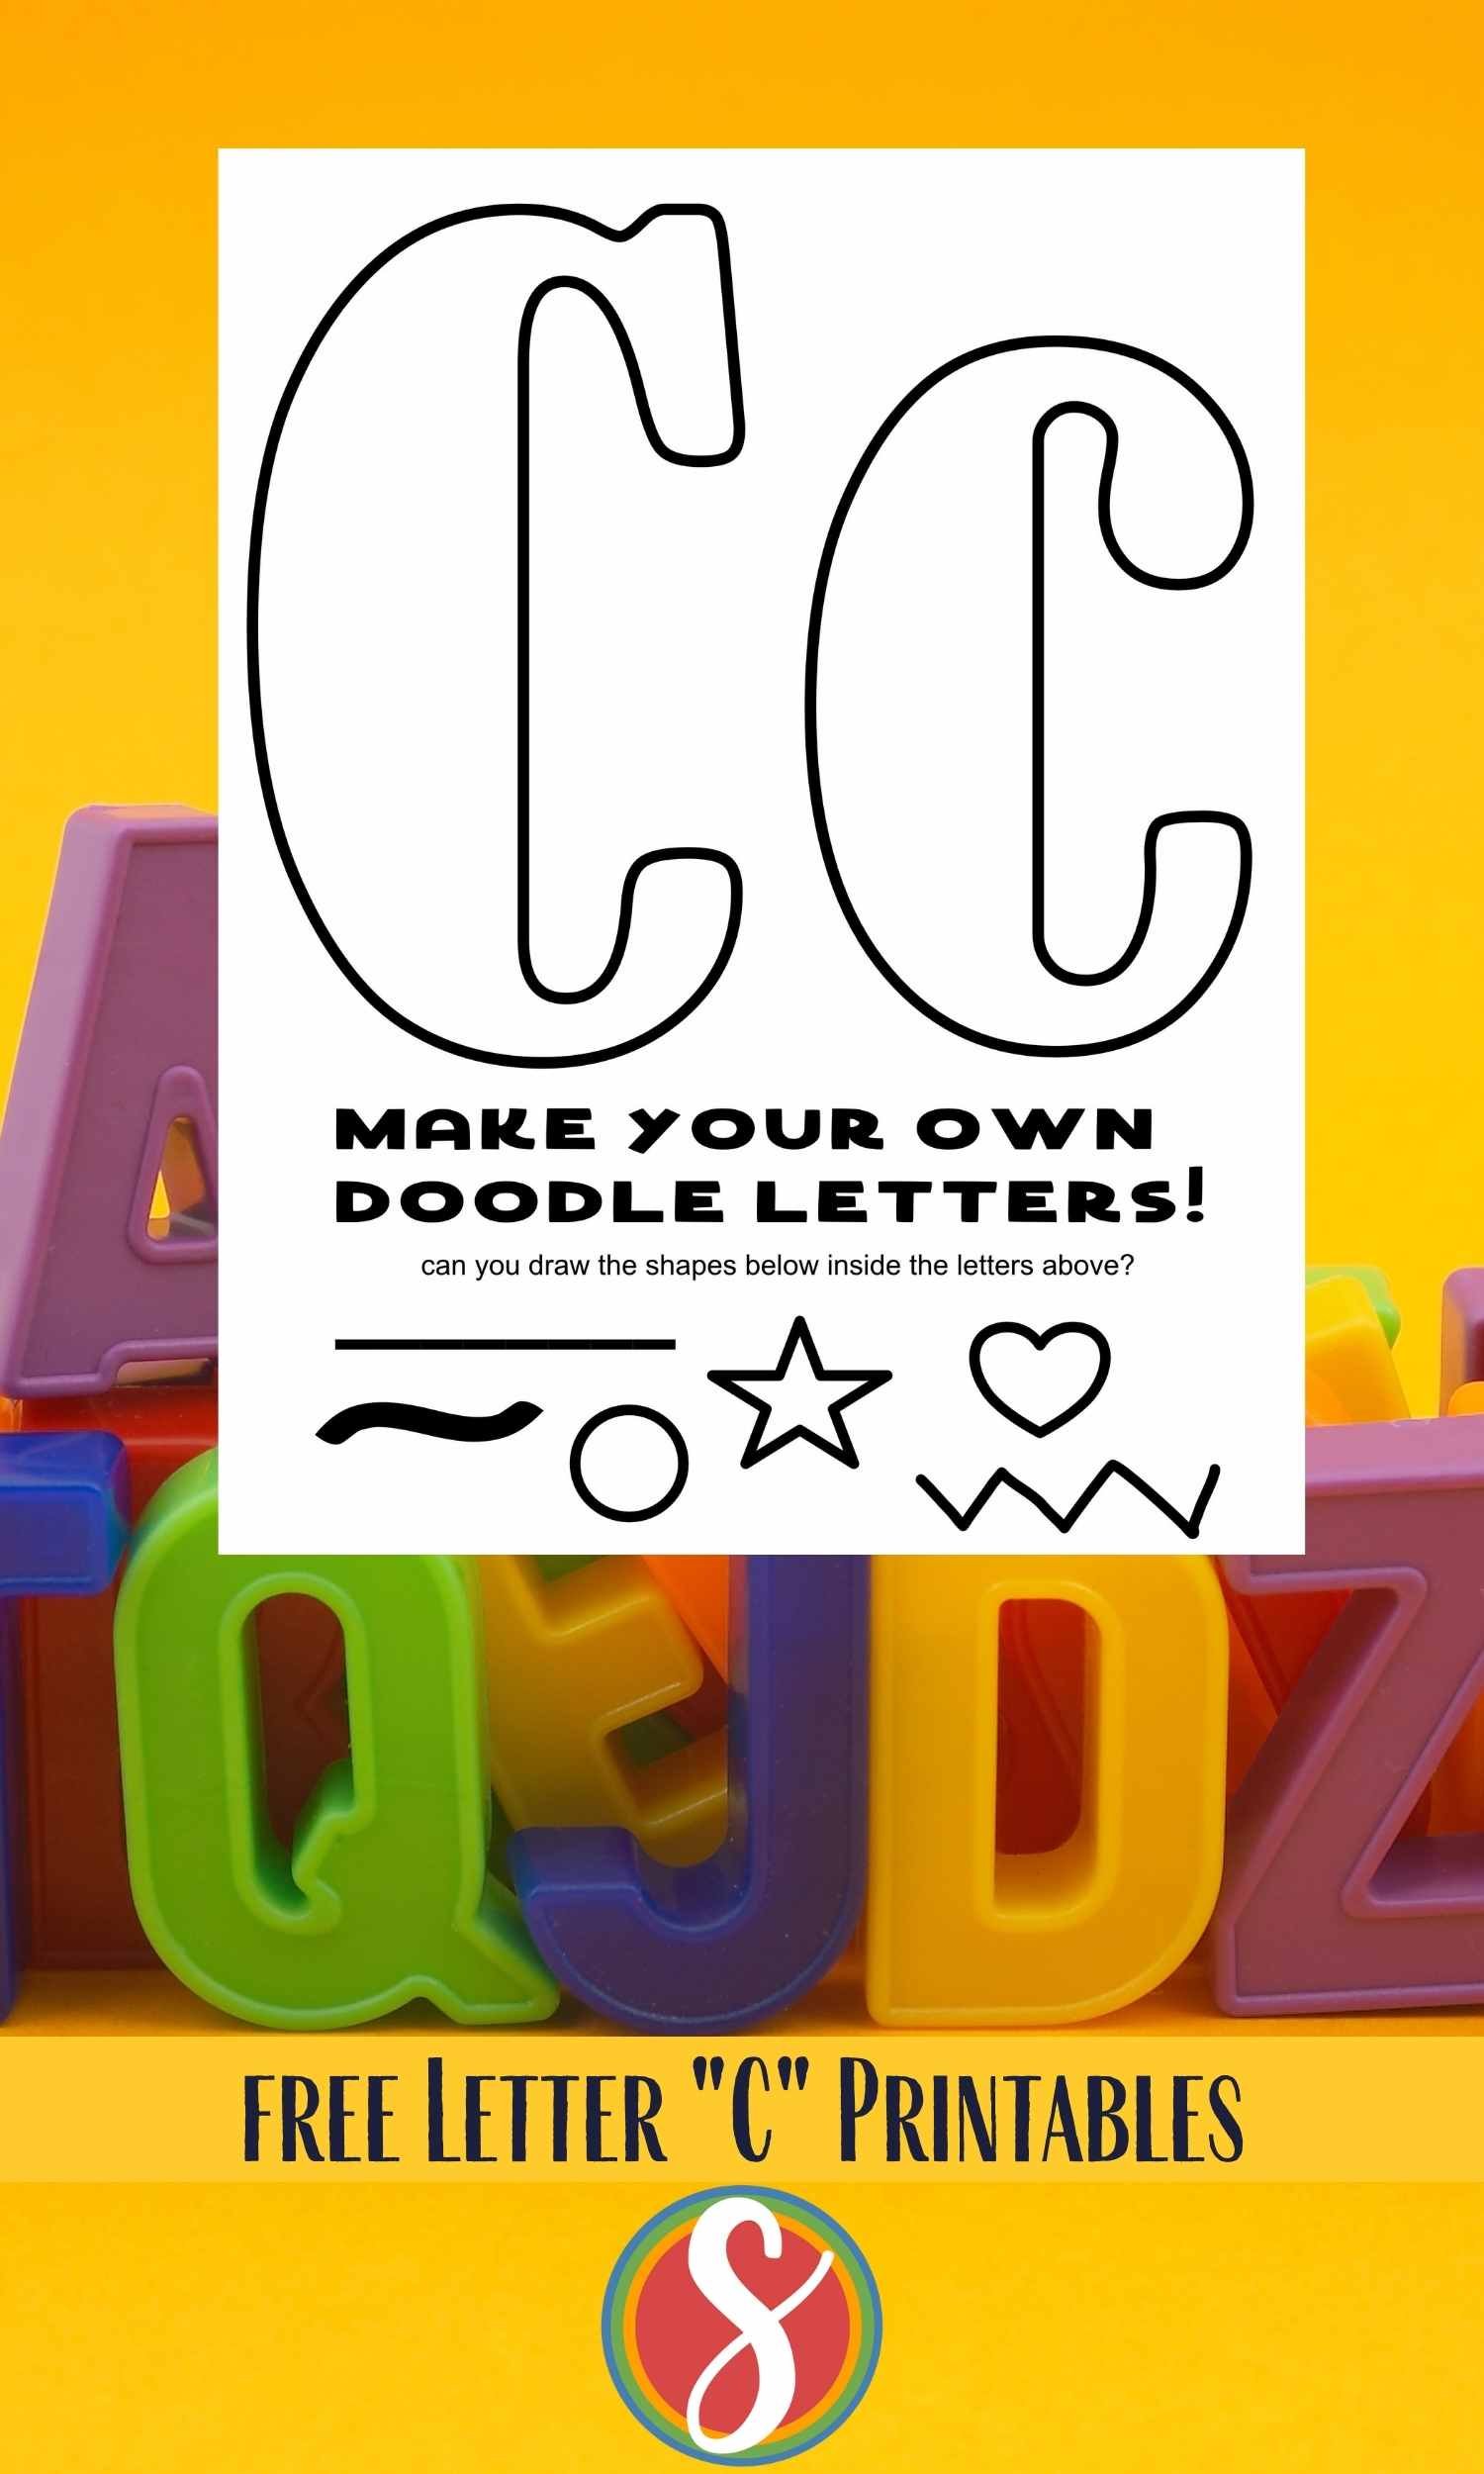 bubble letter c's, blank, with invitation to fill with your own doodle designs